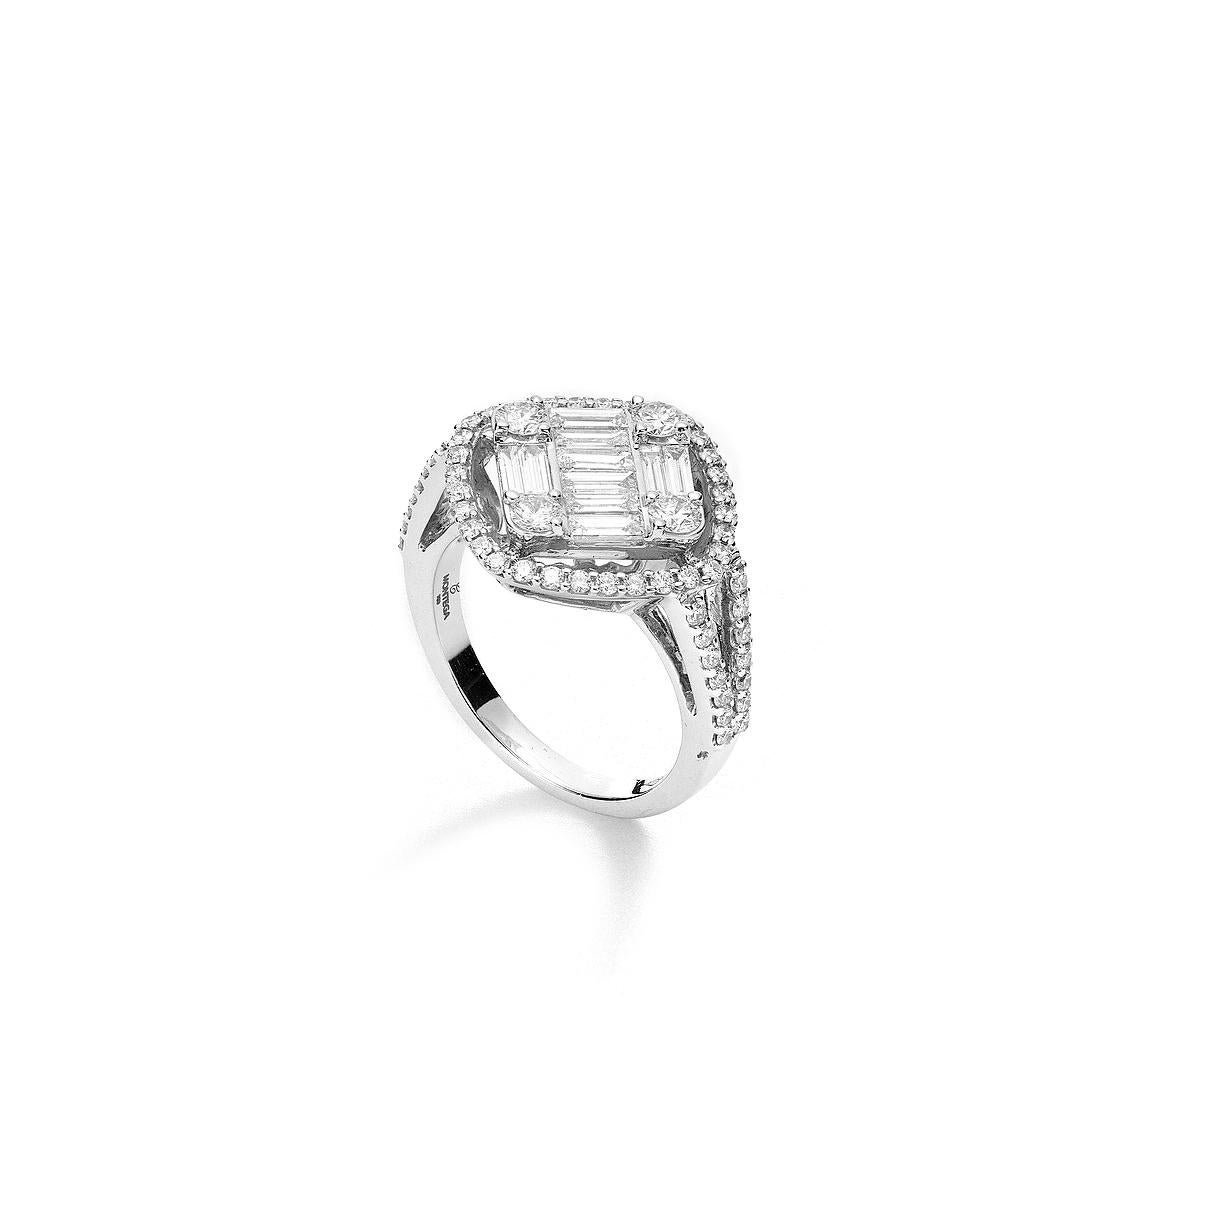 Ring in 18kt white gold set with 35 diamonds 0.25 cts and 4 princess      
cut diamonds 0.12 cts and 8 marquise cut diamonds 0.37 cts